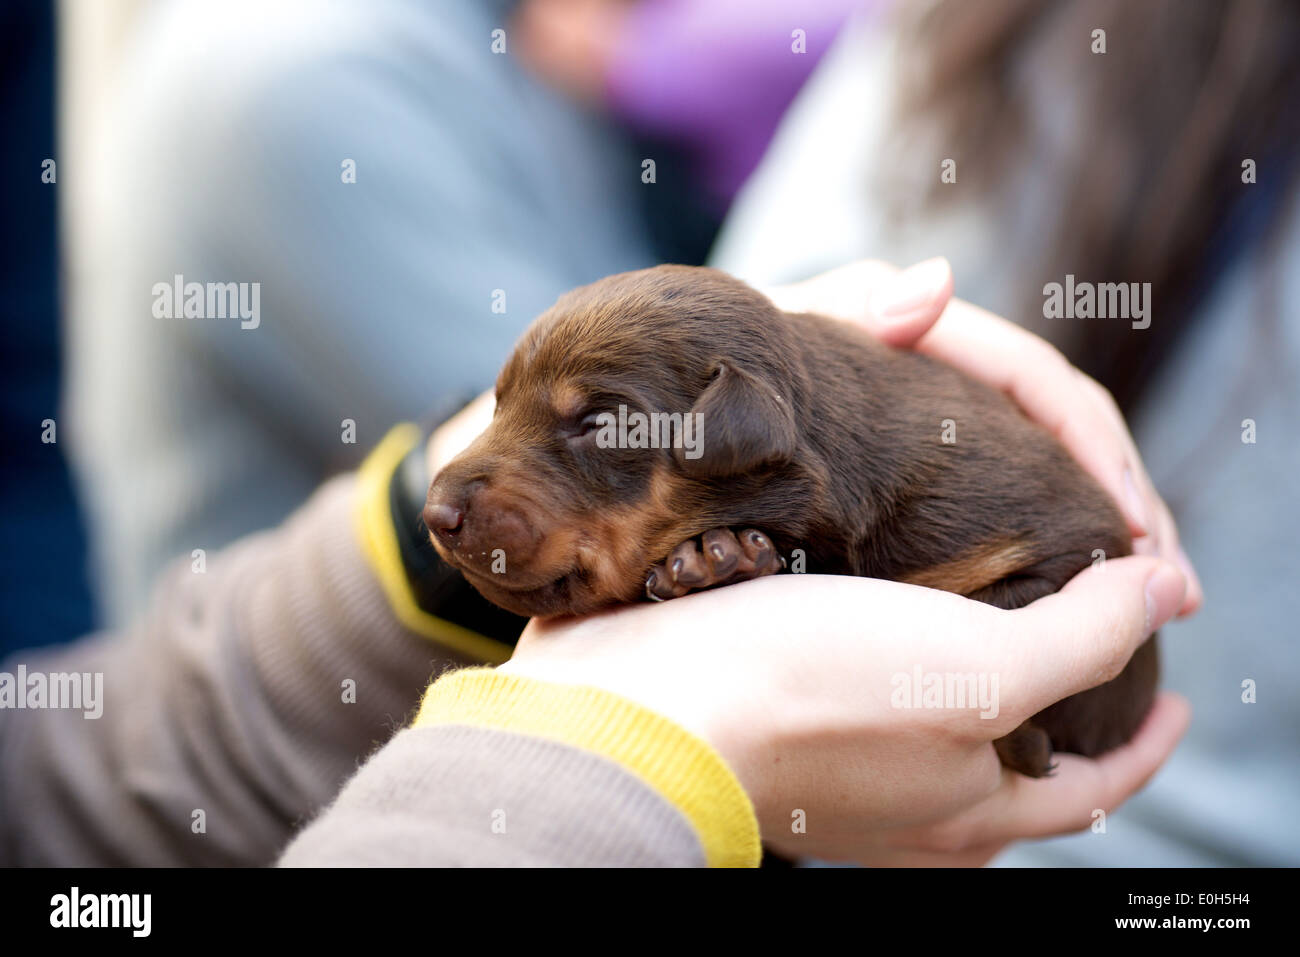 Holding brown puppy dog that is resting in a human hand Stock Photo